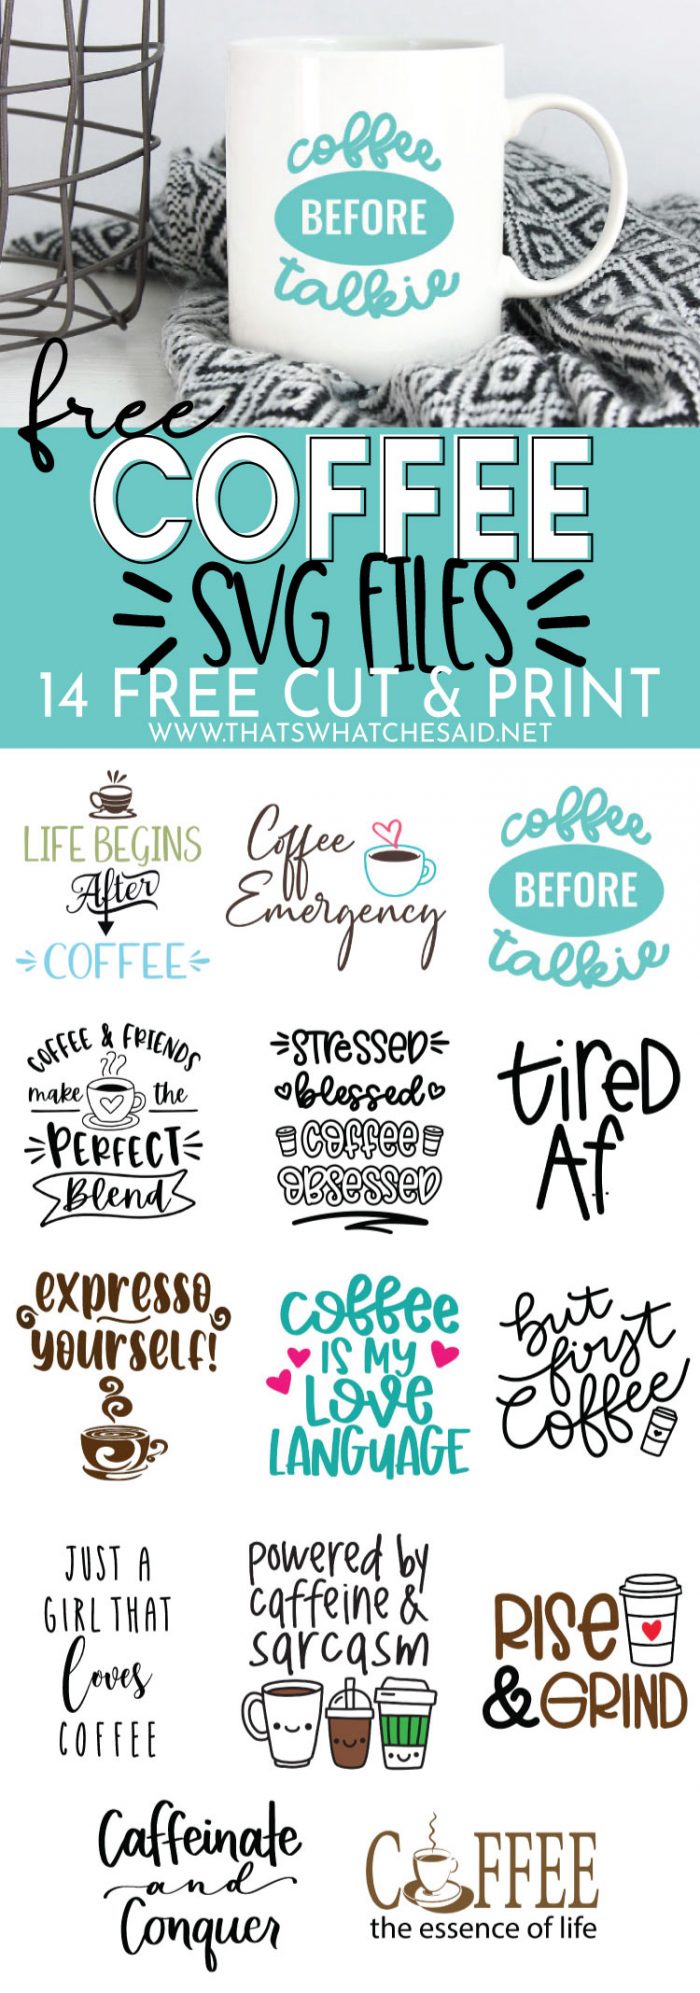 Pinterest Pin, Coffee Mug with wording about free coffee svg files